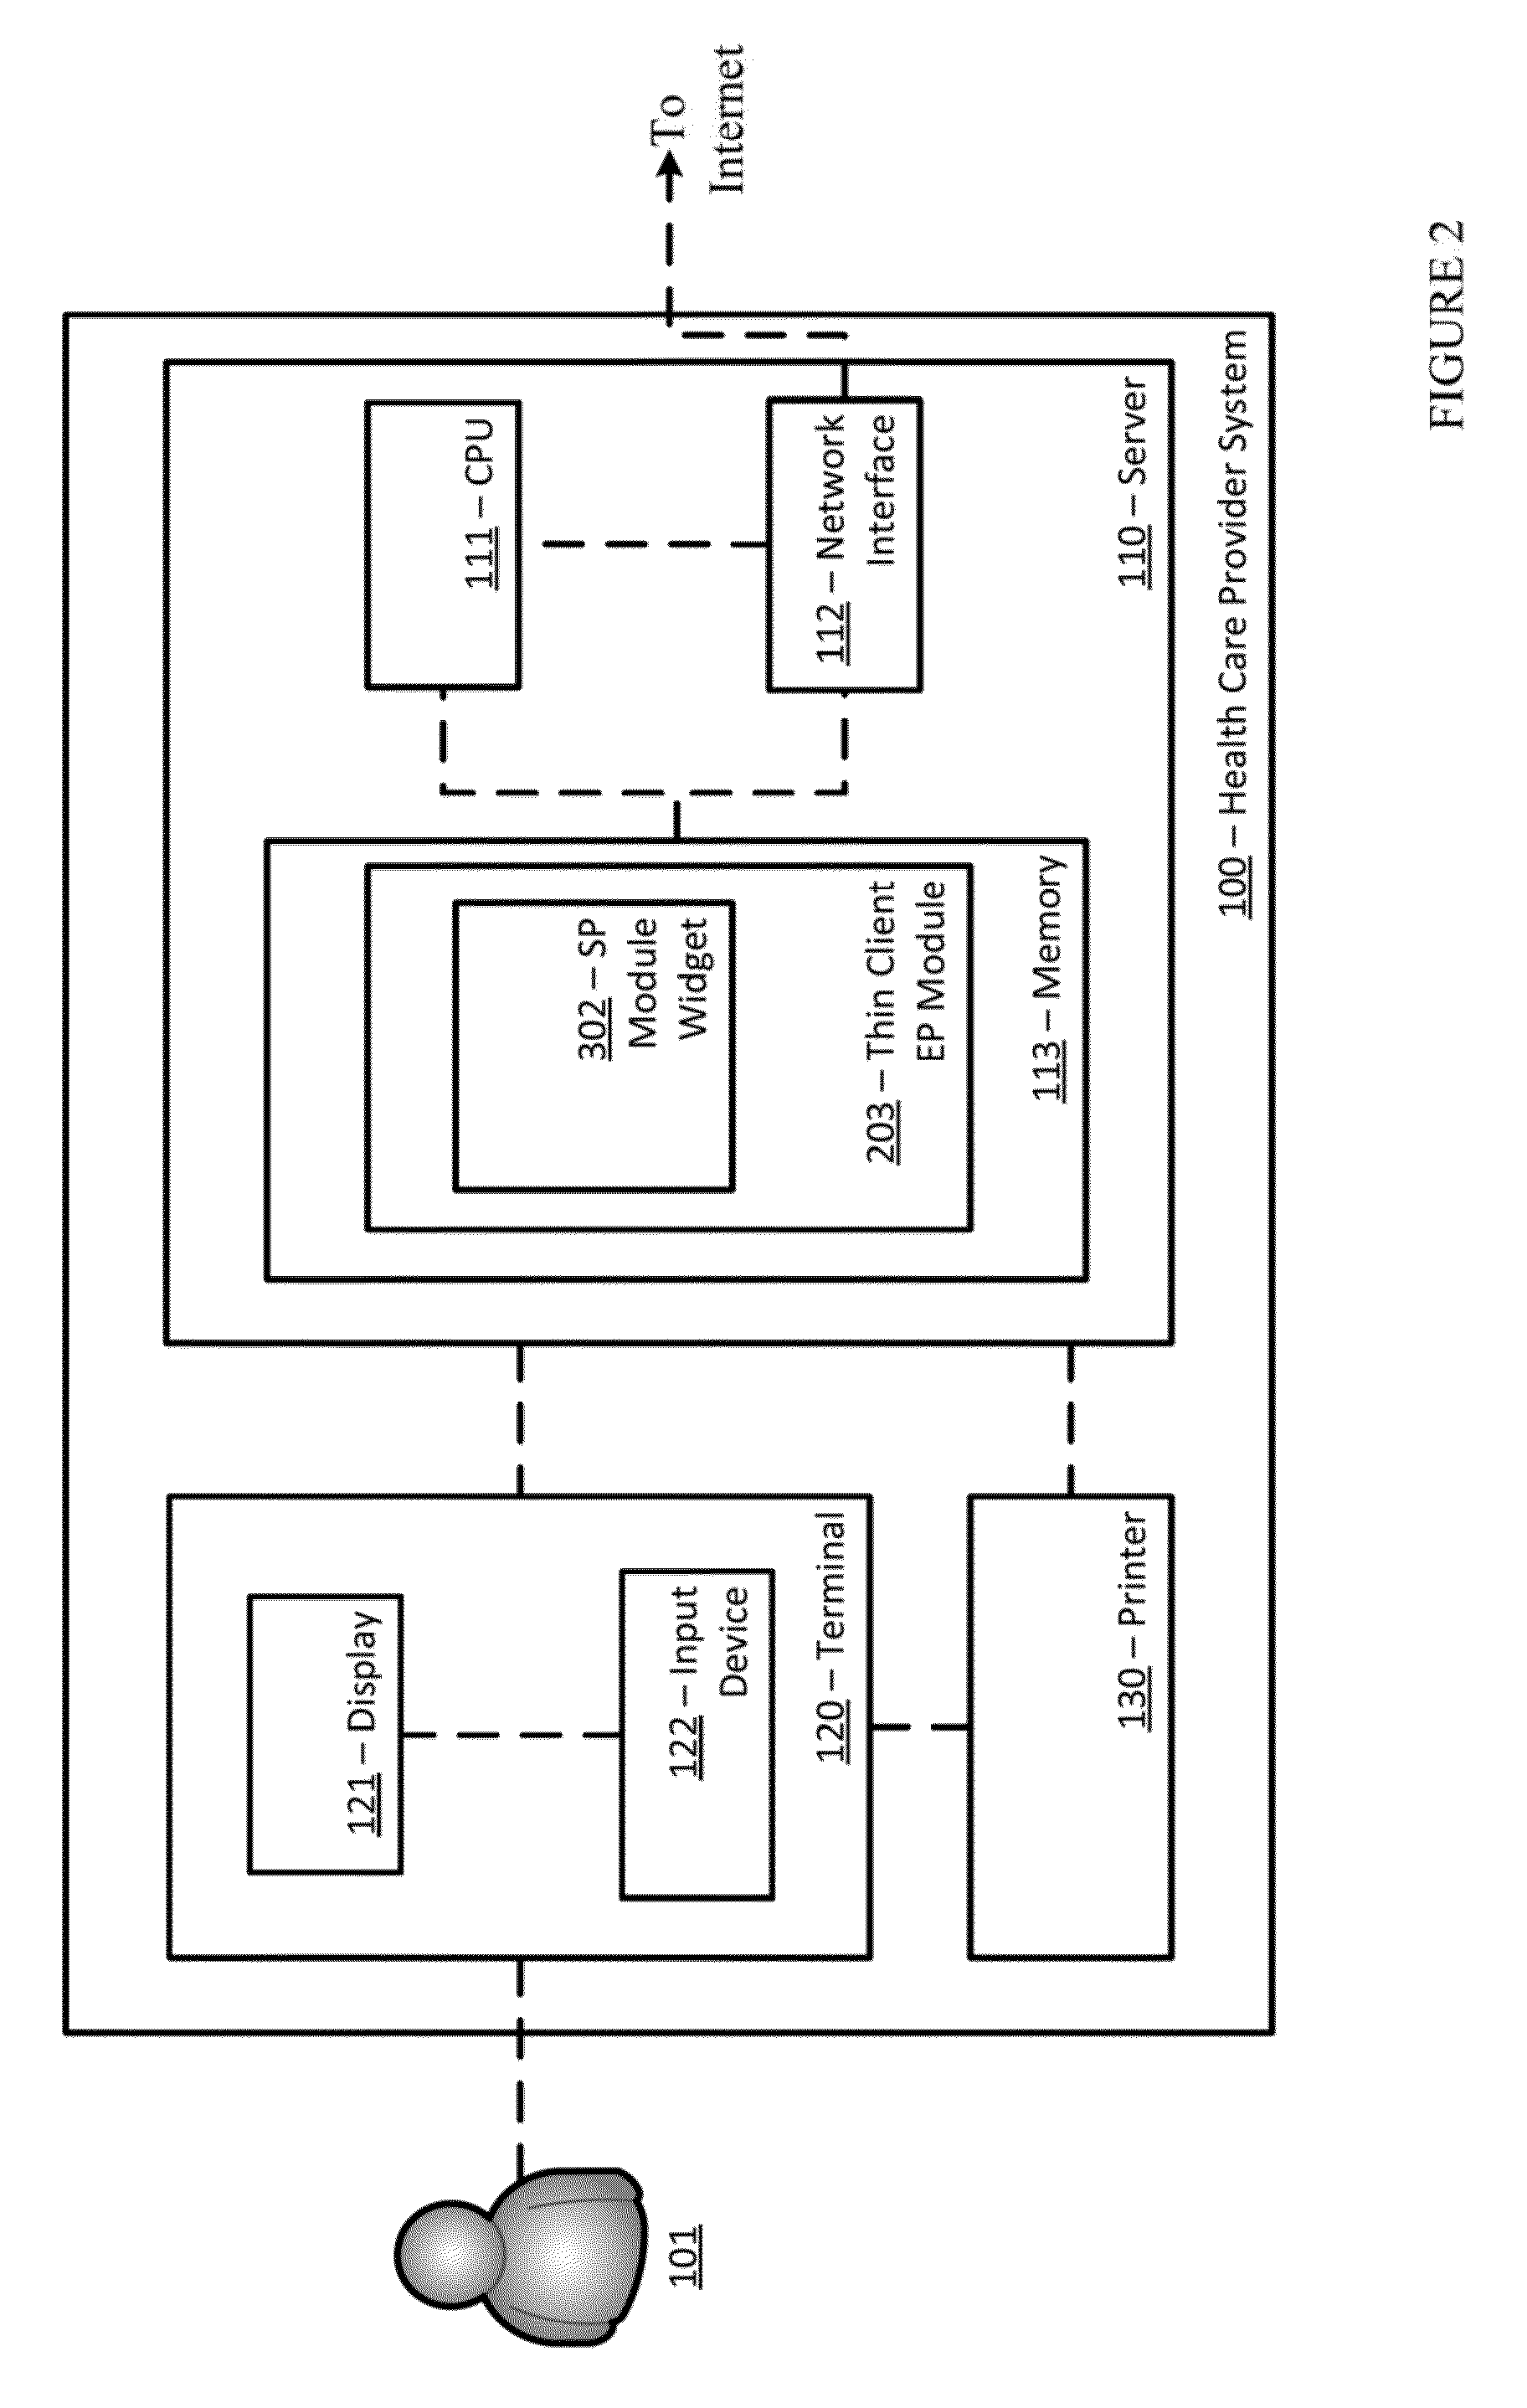 Systems and methods for increasing patient adherence using combined educational coupons and/or tailored educational documents